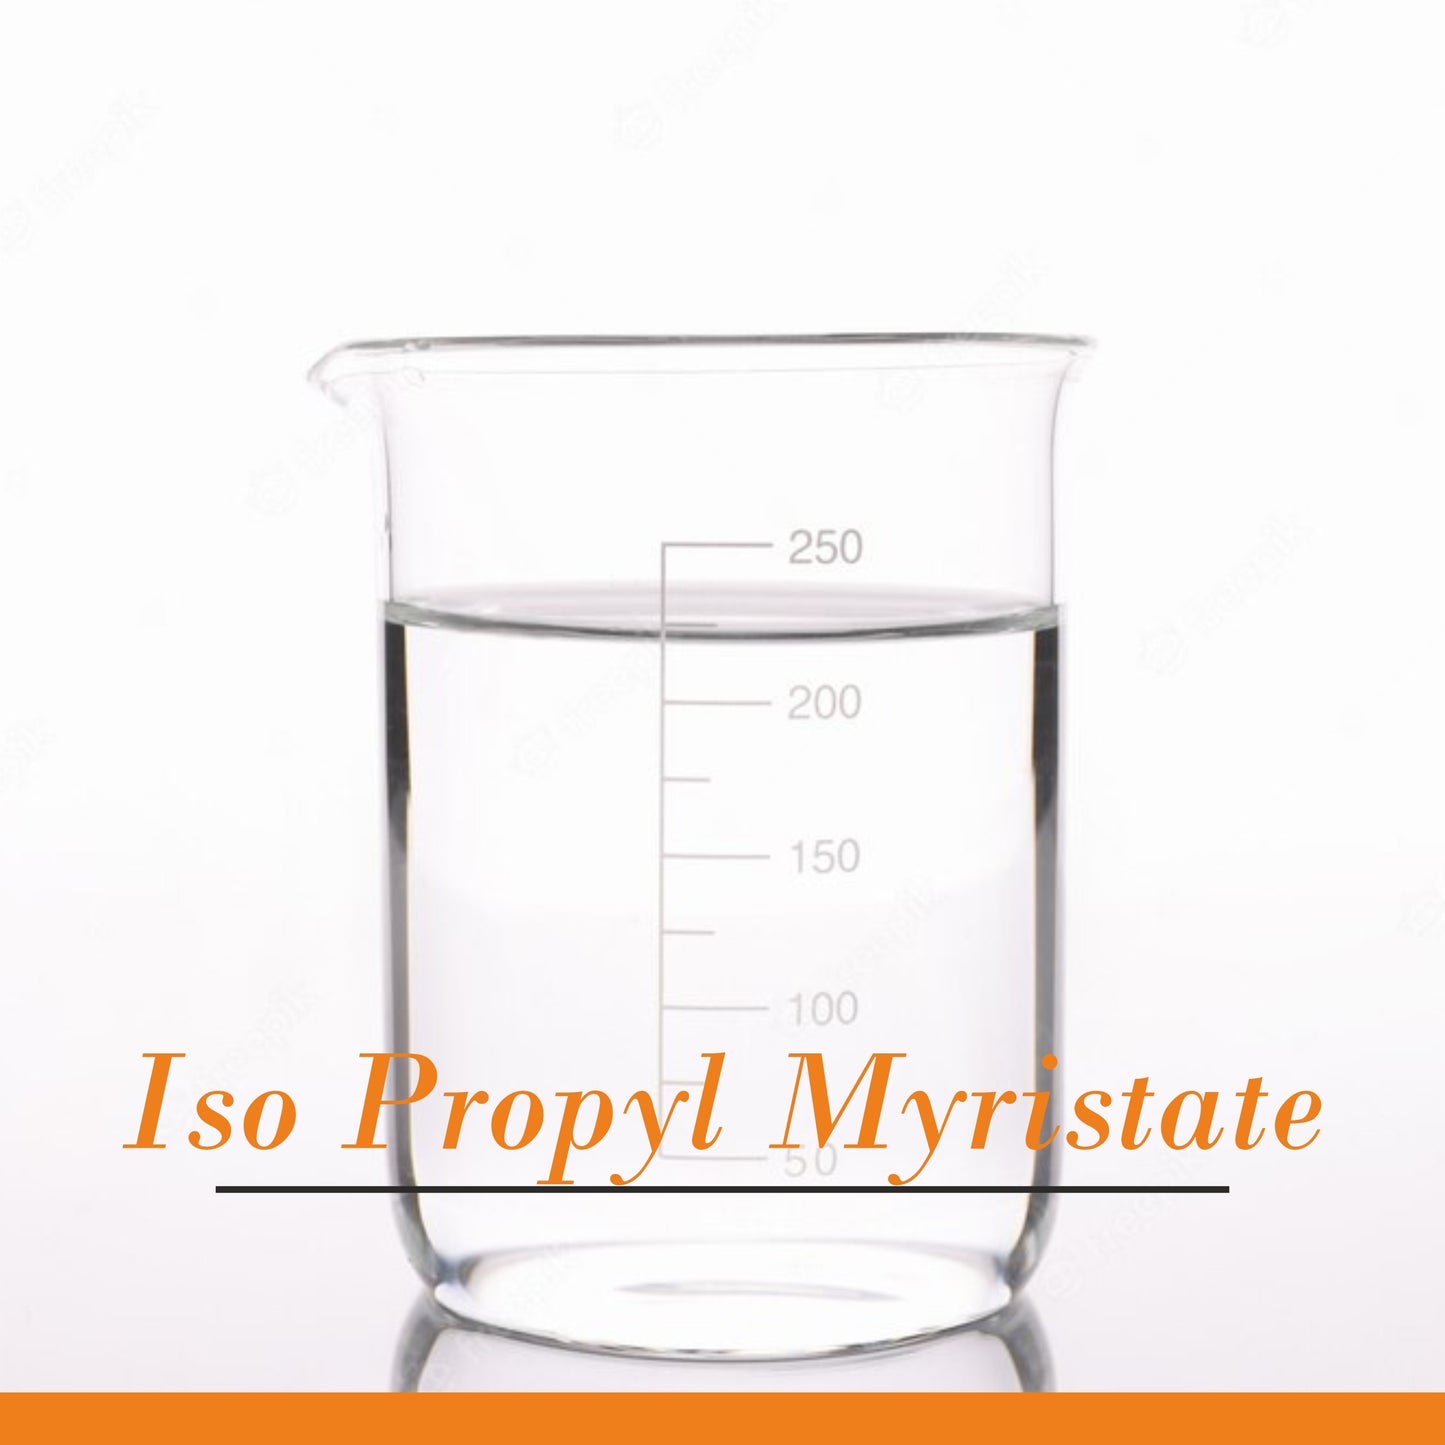 Soap Crafts Co. Iso Propyl Myristate for DIY Projects, Soap Making and Cosmetic Making